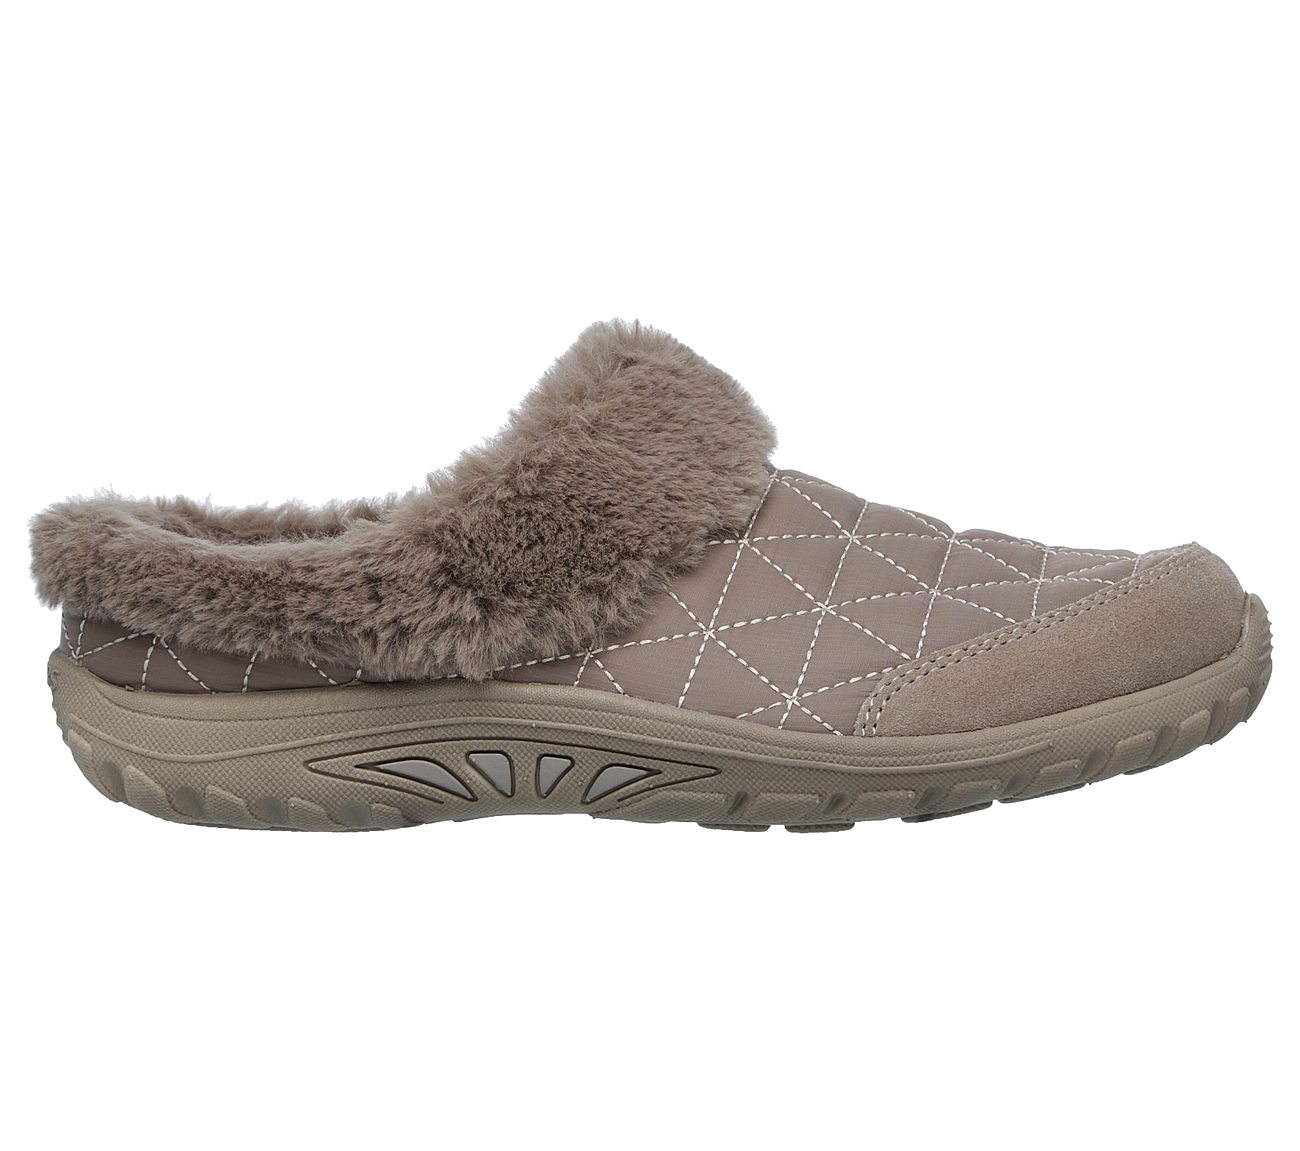 Buy SKECHERS Relaxed Fit: Reggae Fest - Fuzzy Vibes Modern Comfort Shoes